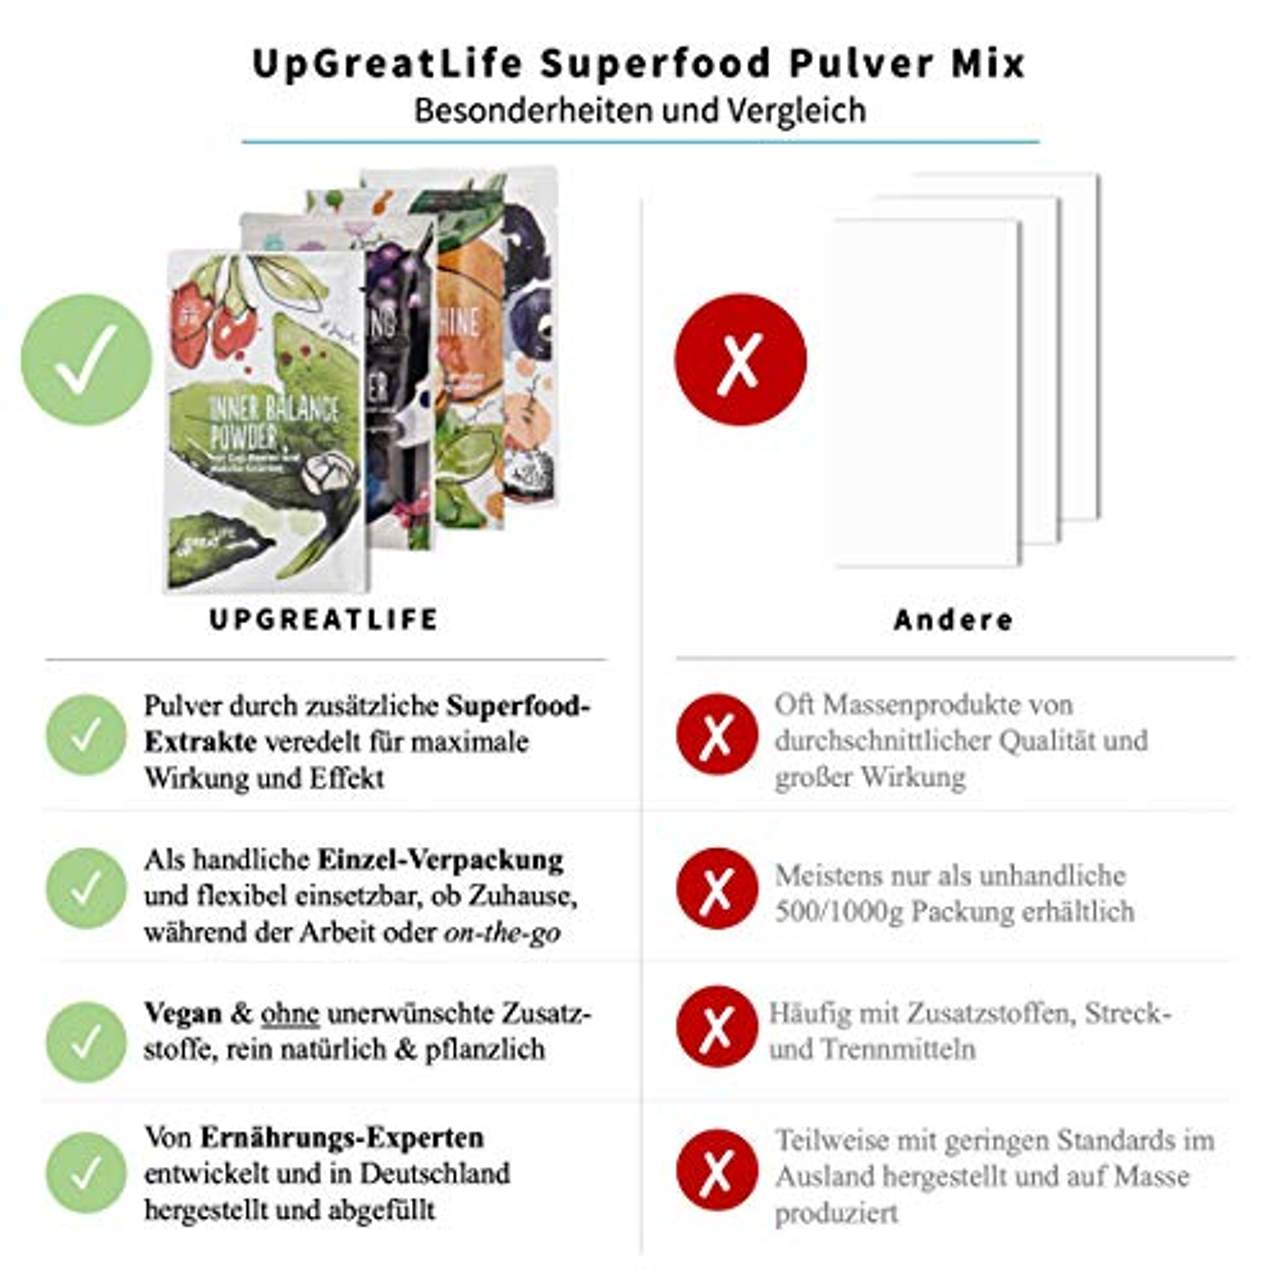 Superfood Smoothie Pulver Mix und Toppings